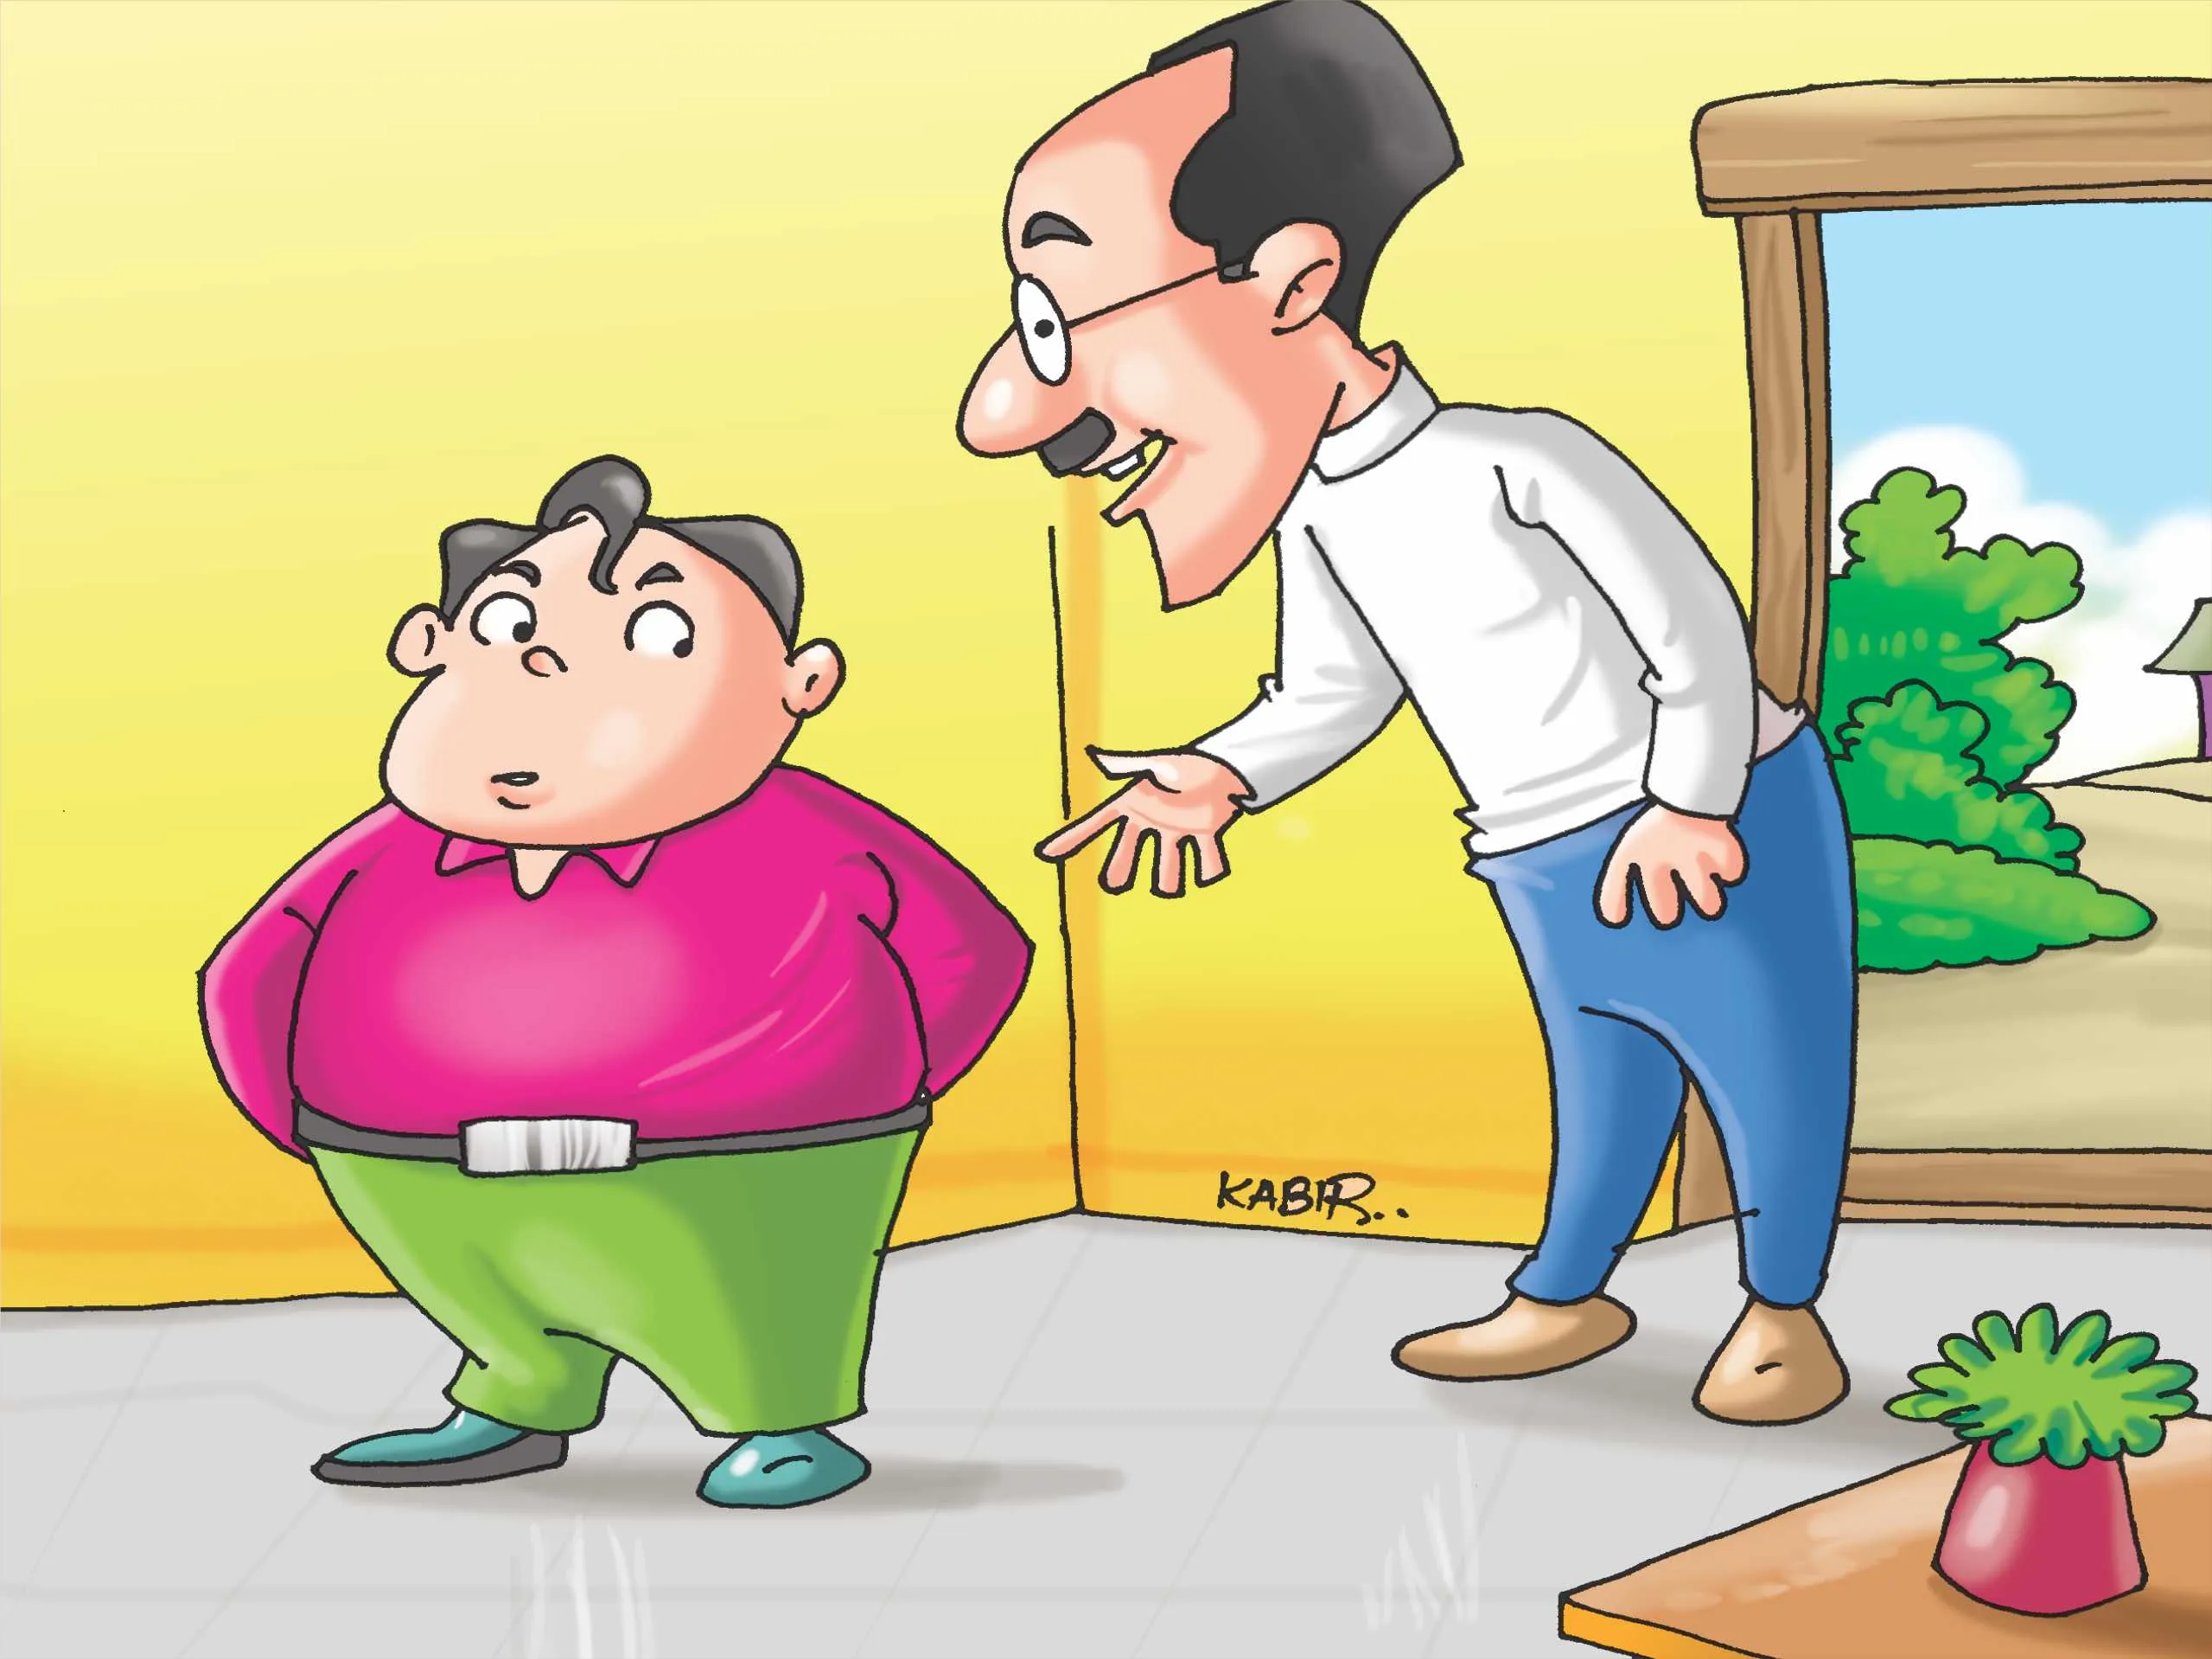 Father talking to his son cartoon image